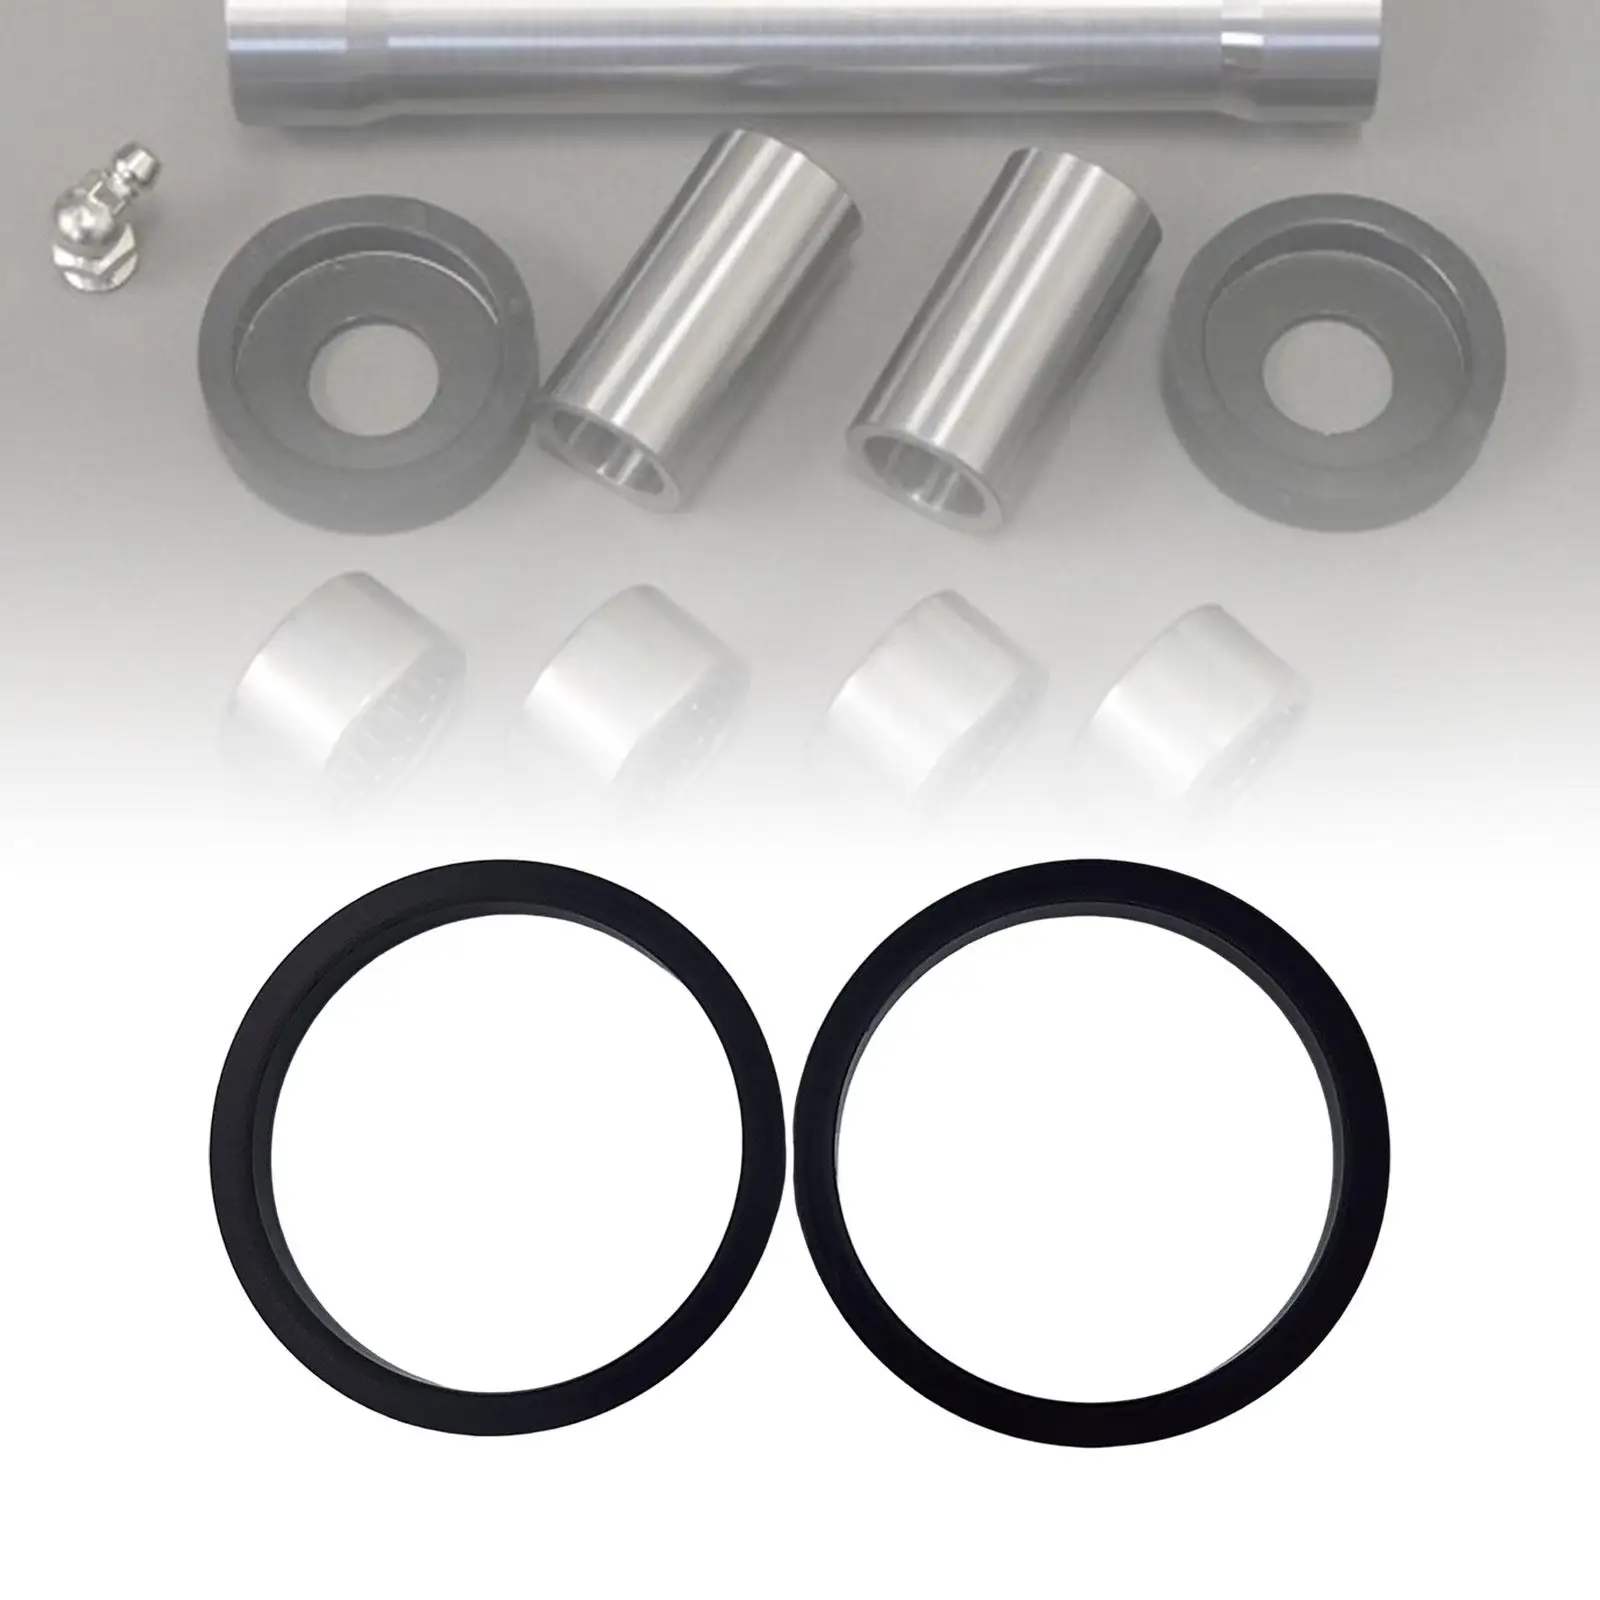 2x Premium Pivot Bushings Set Replacement Replace 2287300 Spare Parts for Ultrex Motors Easy to Install Durable